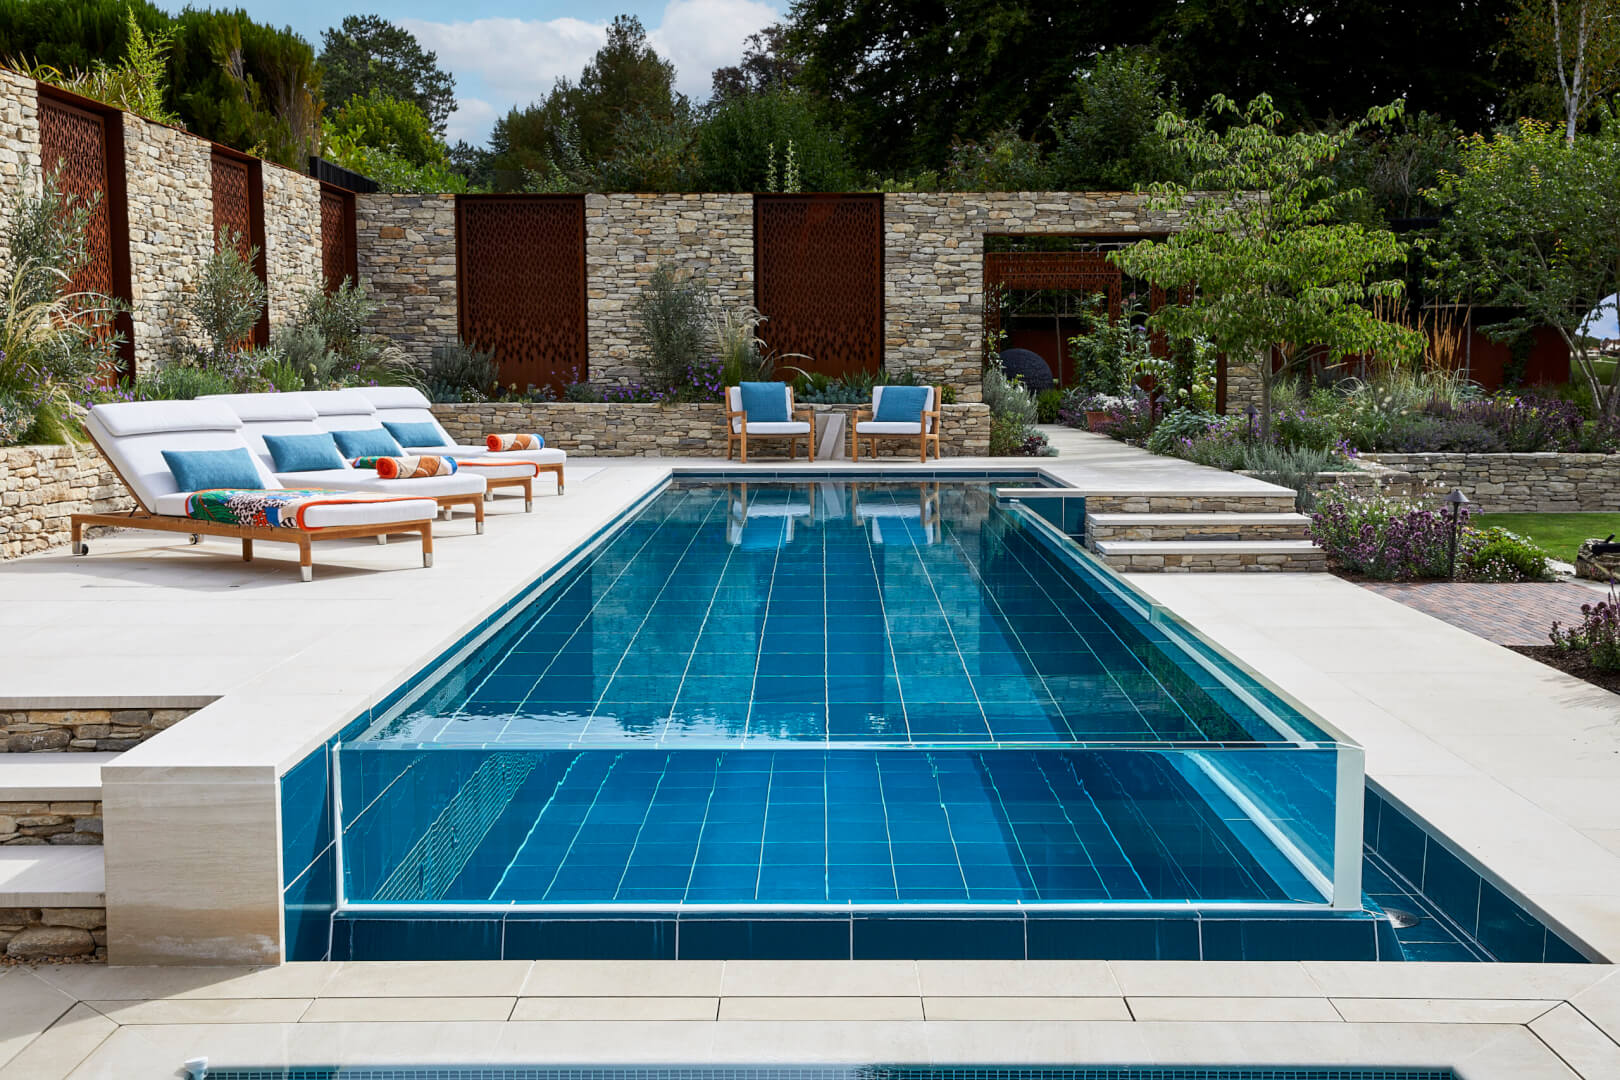 Planning an outdoor pool for your home? What to look for in a swimming pool design and build expert